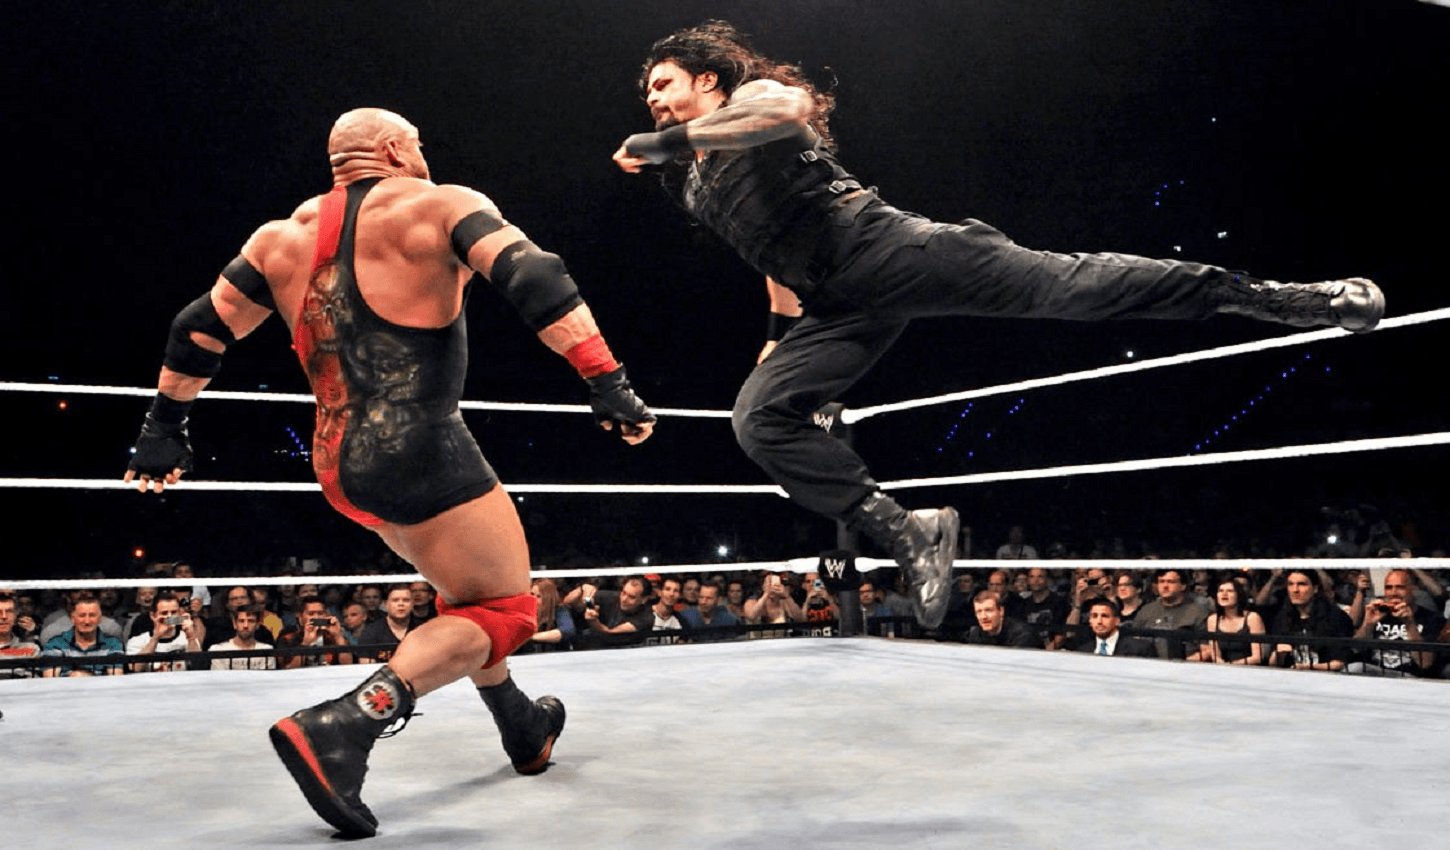 WWE Wallpaper High Definition Wallpaper: Superman Punch By Roman Reigns To Rayback